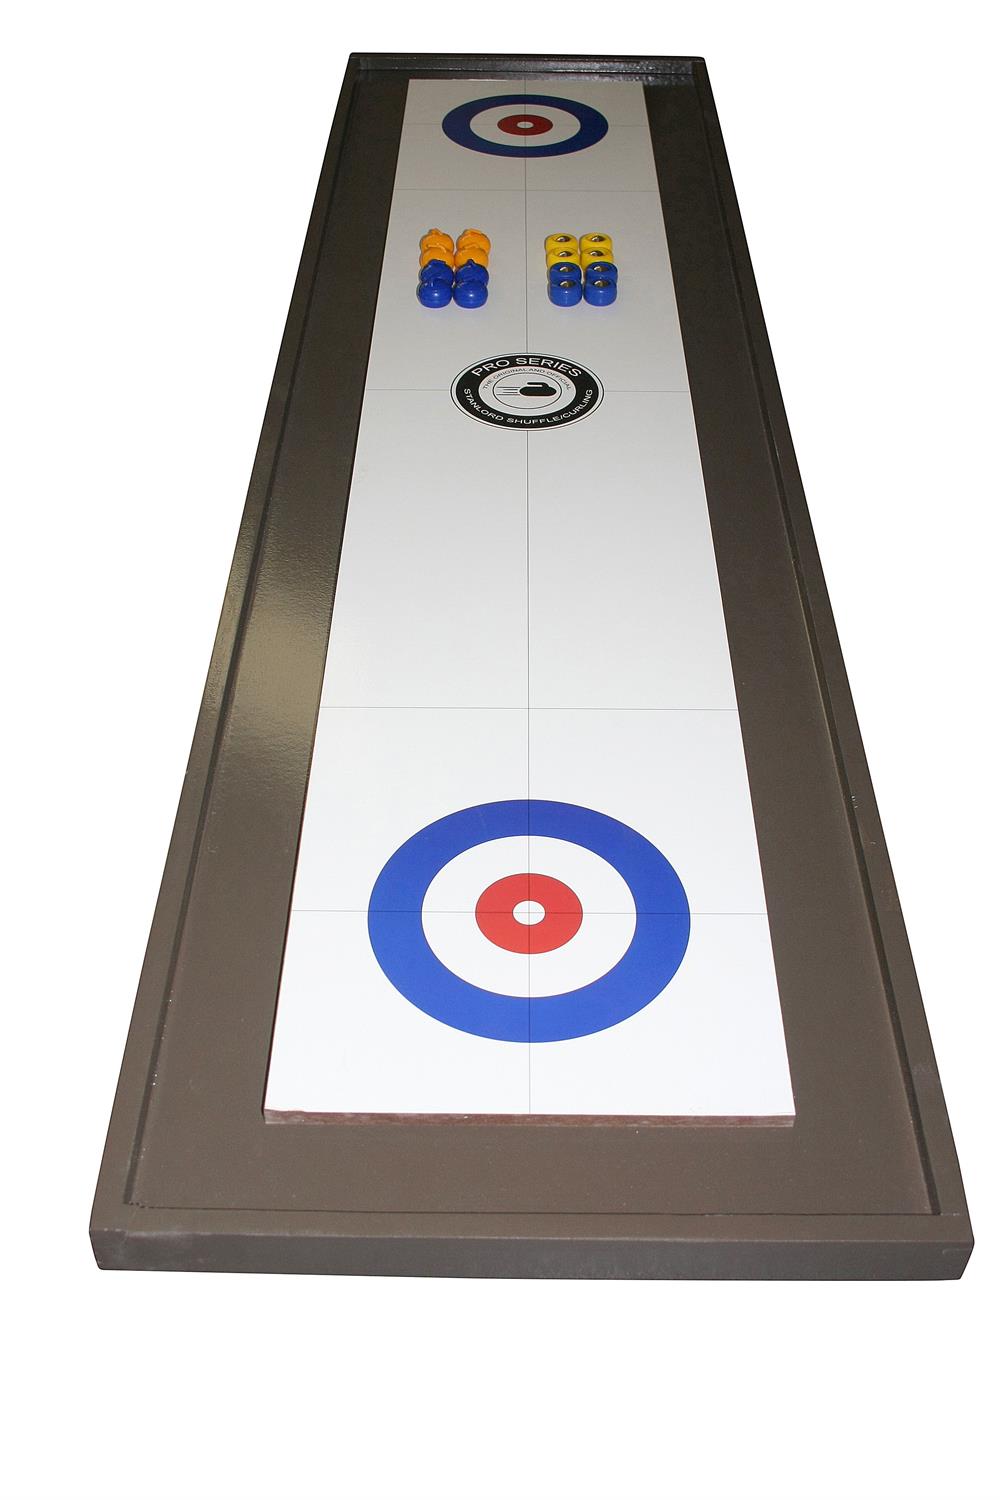 Stanlord Curling Shuffle Pro Series 2i1